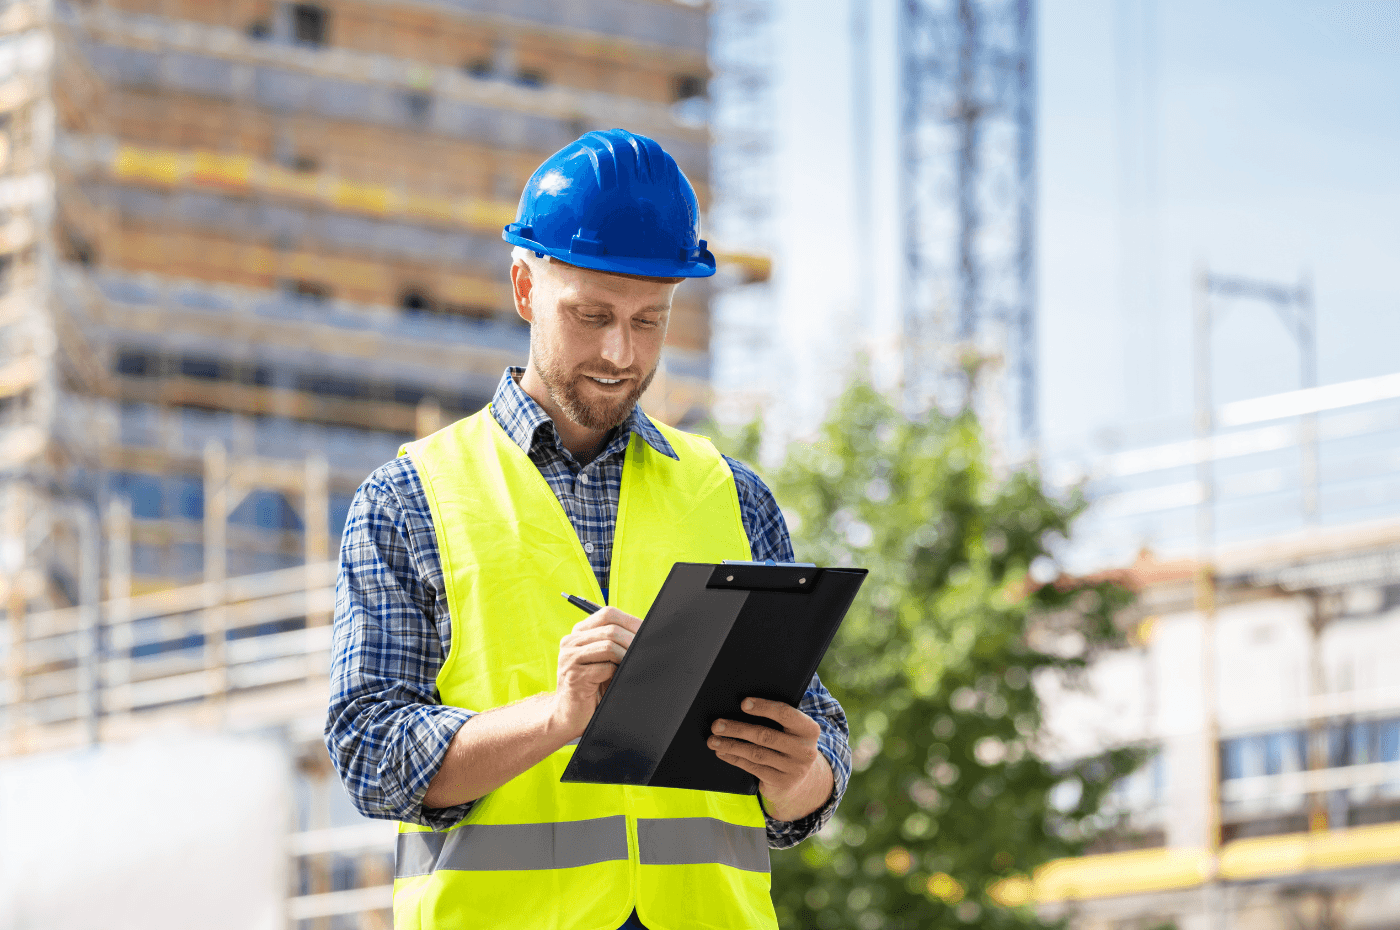 What is the role of a building inspector?